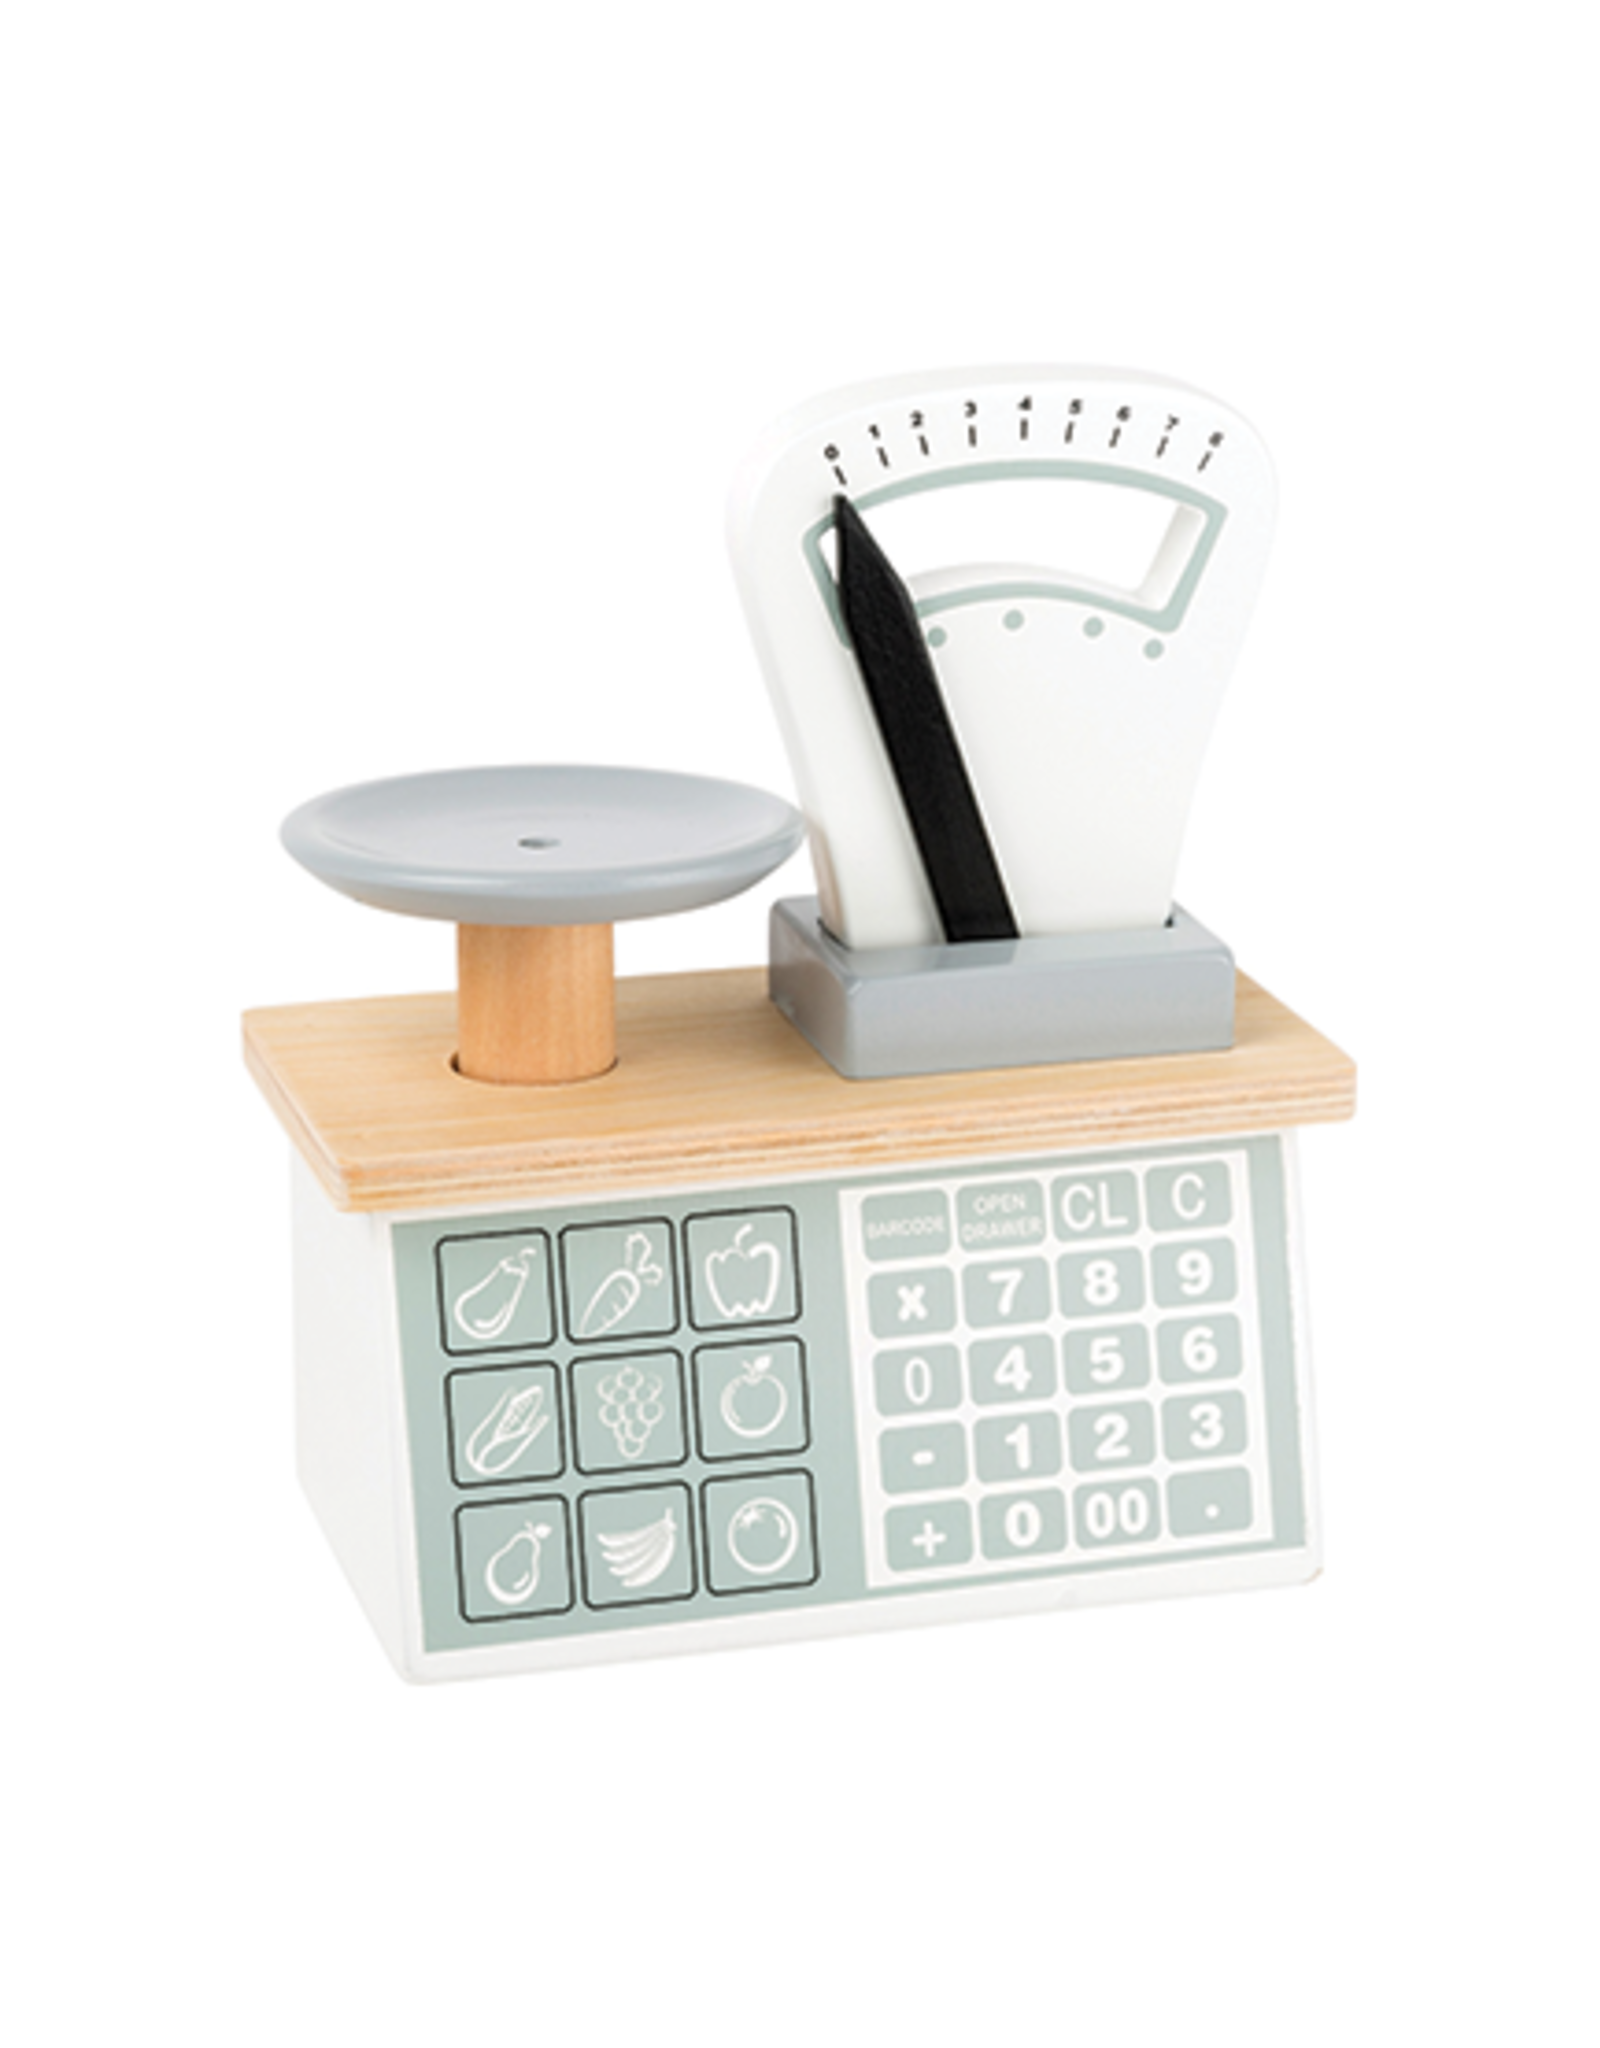 Small Foot Small Foot Kitchen Scale Playset